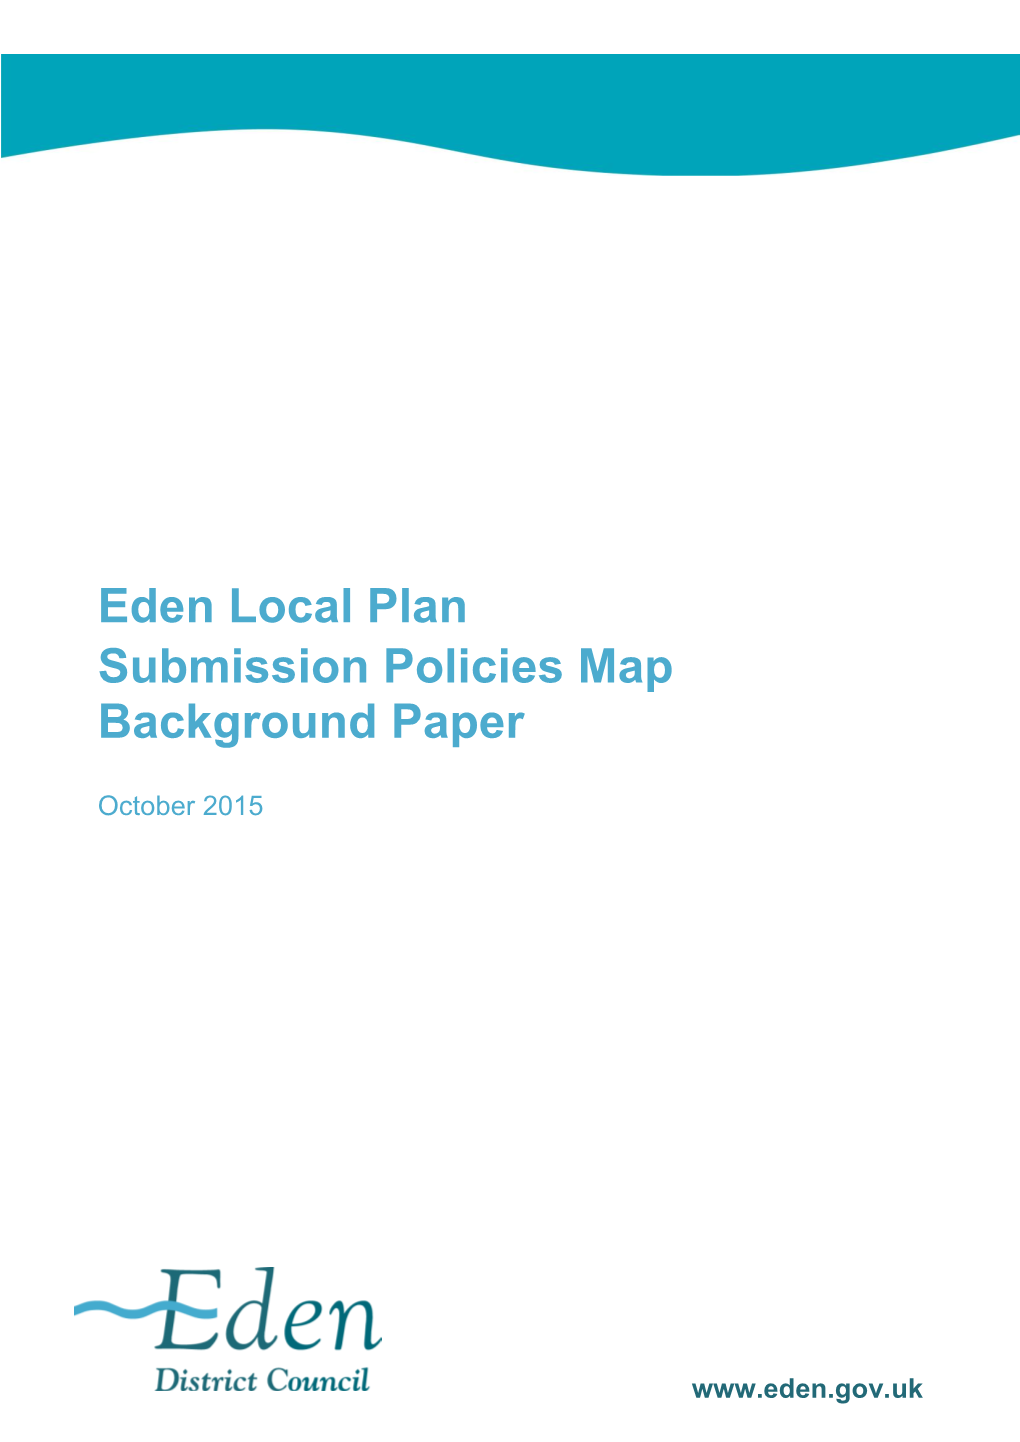 Eden Local Plan Submission Policies Map Background Paper